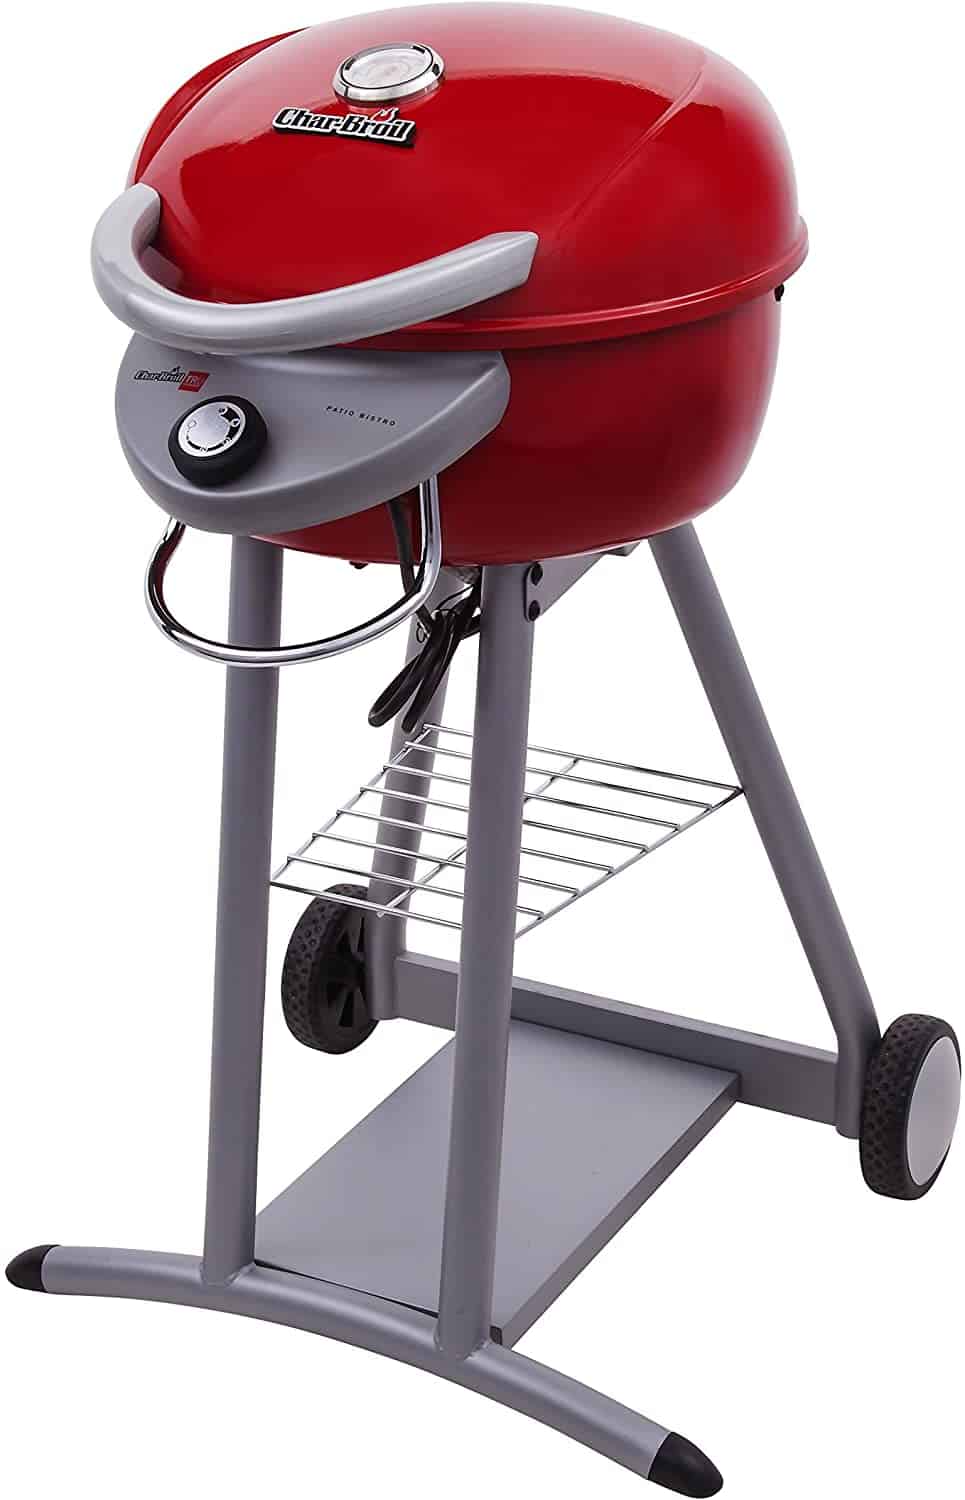 Best electric grill for a small balcony- Char-Broil Infrared Electric Patio Bistro